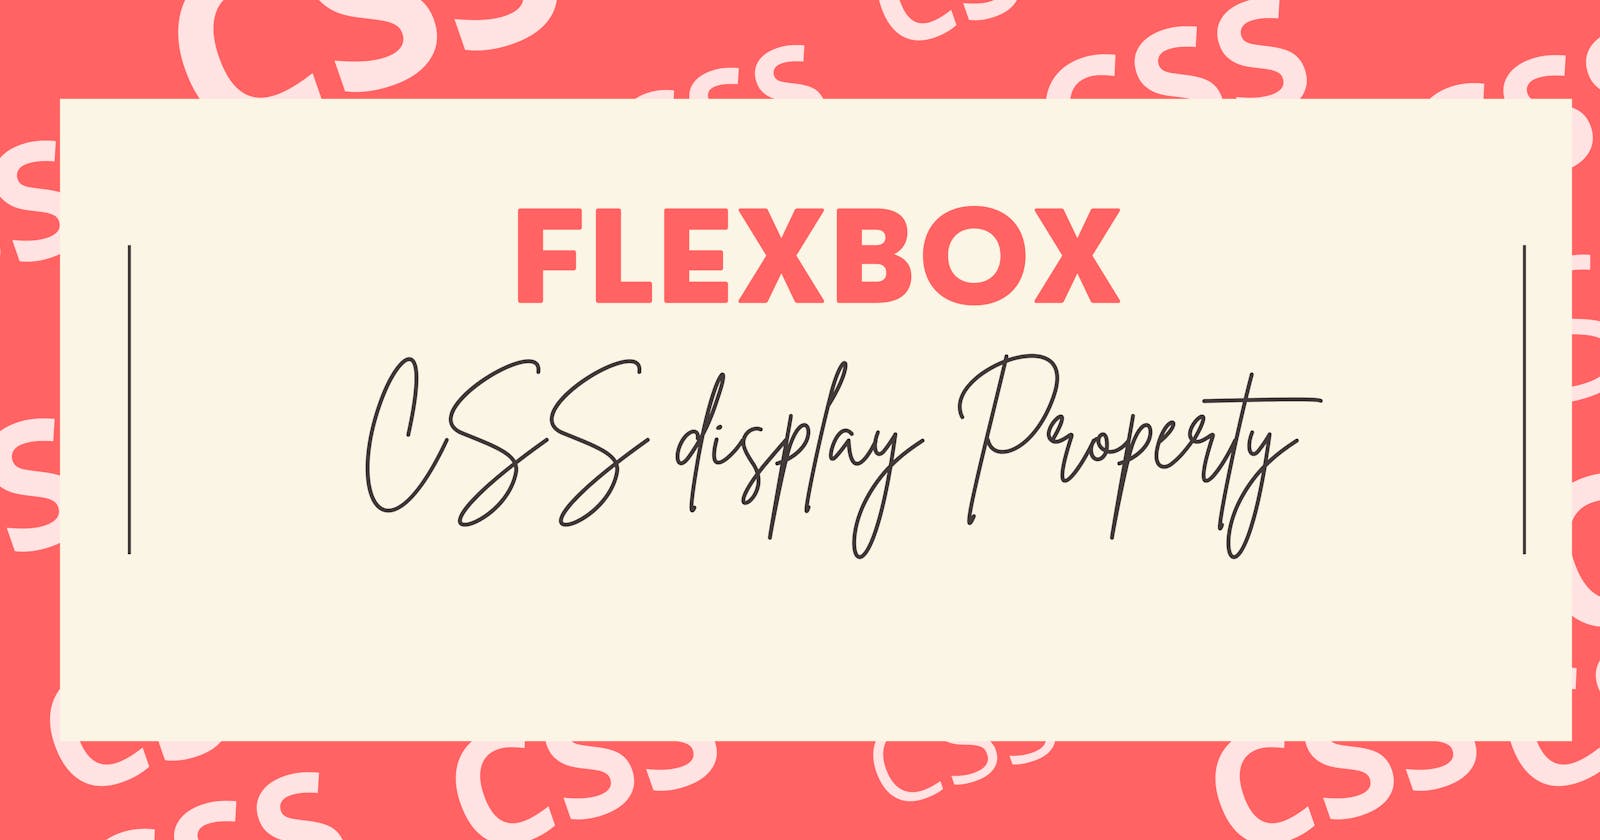 Let's learn CSS Flexbox the easy way!